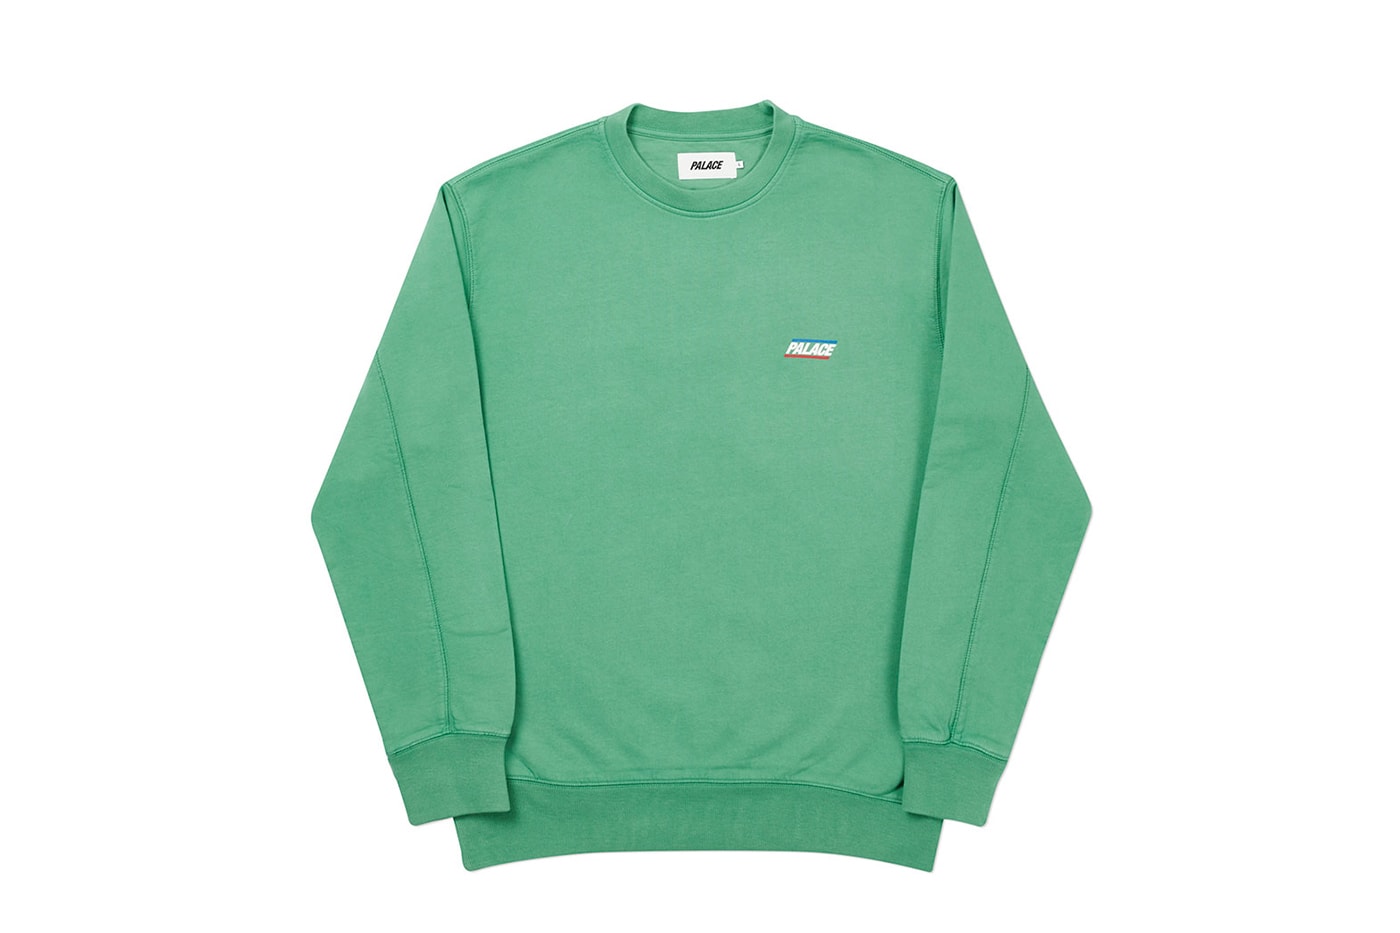 Palace Fall 2020 Sweatshirts Hoodies spitfire collection release info